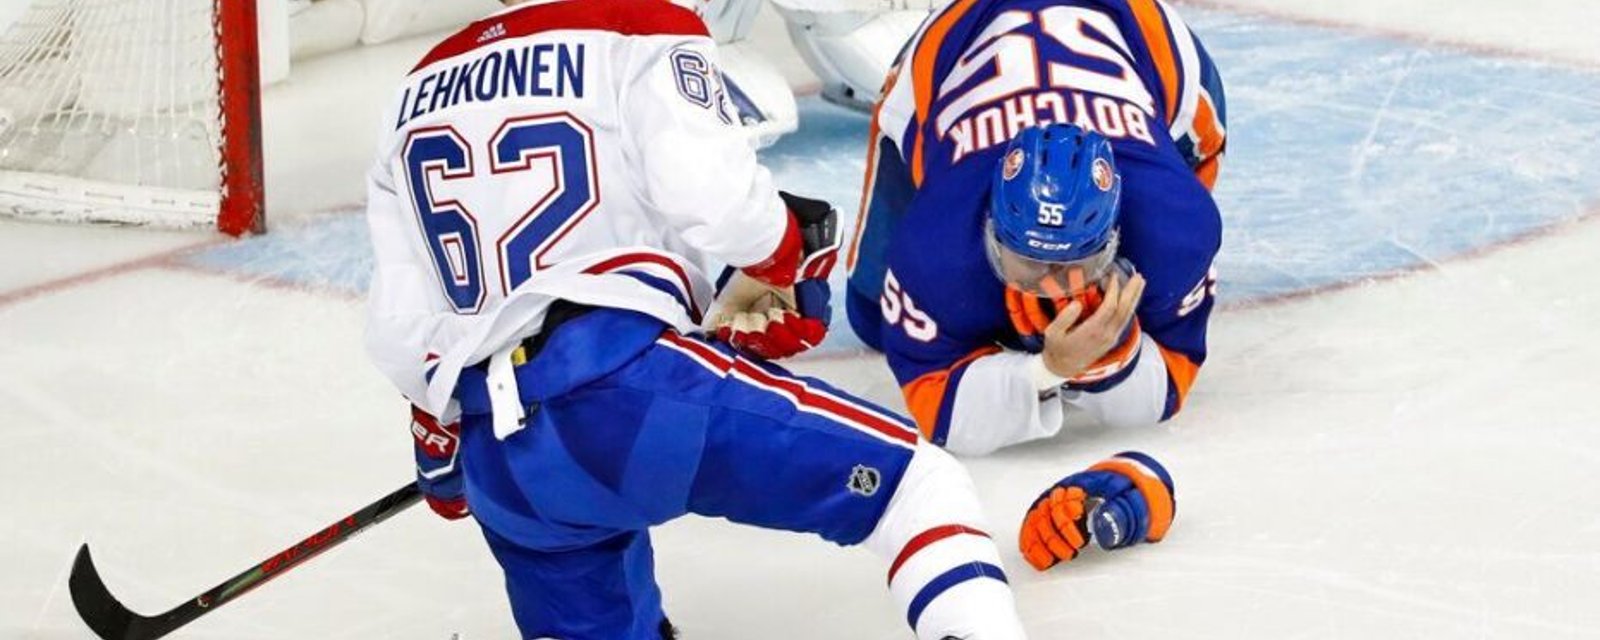 Boychuk releases statement after taking skate to the face